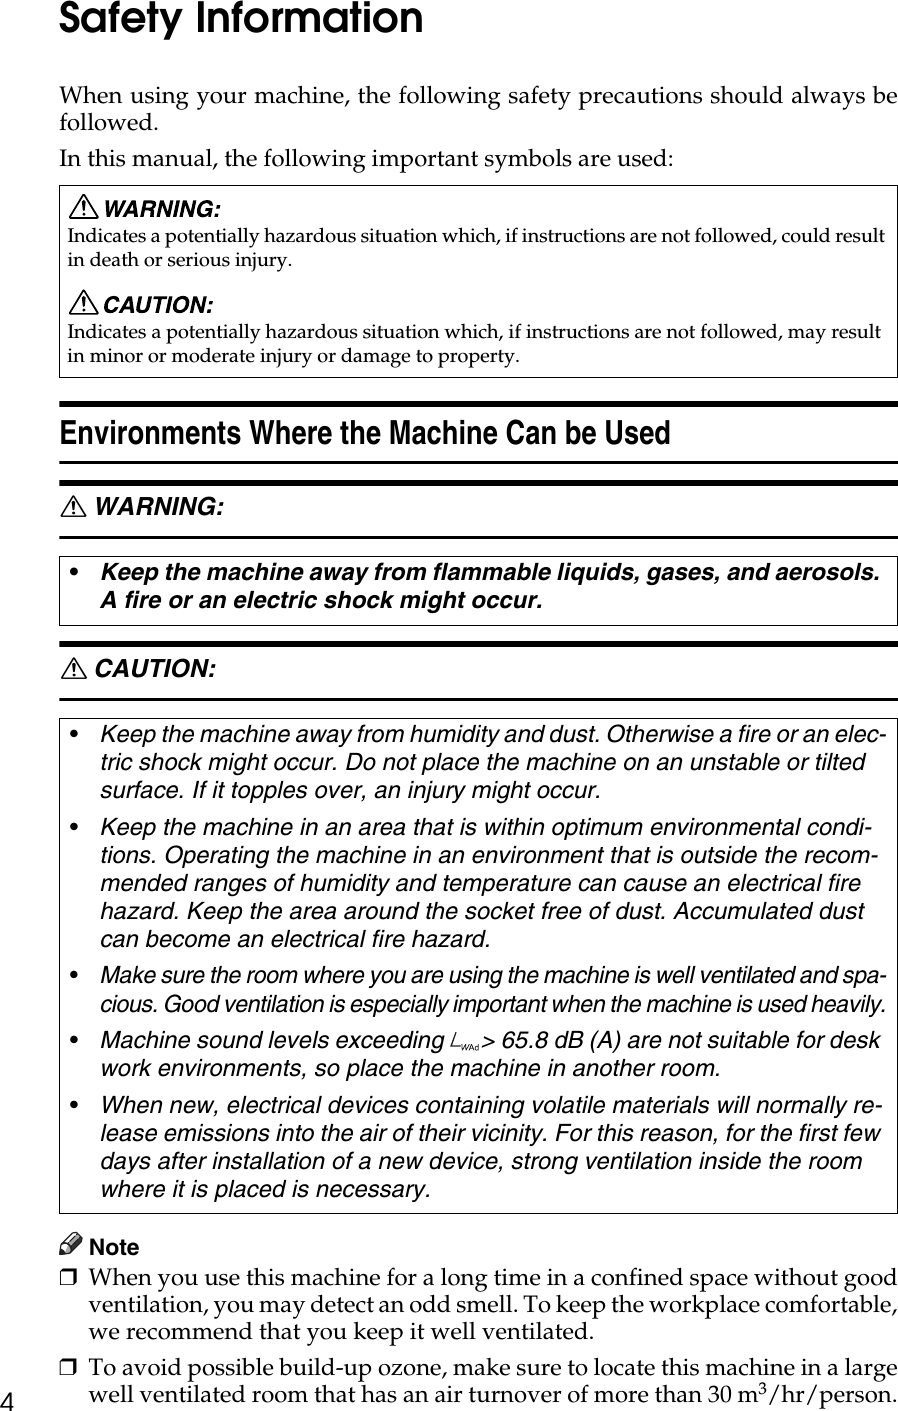 4Safety InformationWhen using your machine, the following safety precautions should always befollowed.In this manual, the following important symbols are used: Environments Where the Machine Can be UsedR WARNING: R CAUTION: Note❒When you use this machine for a long time in a confined space without goodventilation, you may detect an odd smell. To keep the workplace comfortable,we recommend that you keep it well ventilated.❒To avoid possible build-up ozone, make sure to locate this machine in a largewell ventilated room that has an air turnover of more than 30 m3/hr/person.Indicates a potentially hazardous situation which, if instructions are not followed, could result in death or serious injury.Indicates a potentially hazardous situation which, if instructions are not followed, may result in minor or moderate injury or damage to property.•Keep the machine away from flammable liquids, gases, and aerosols. A fire or an electric shock might occur.•Keep the machine away from humidity and dust. Otherwise a fire or an elec-tric shock might occur. Do not place the machine on an unstable or tilted surface. If it topples over, an injury might occur.•Keep the machine in an area that is within optimum environmental condi-tions. Operating the machine in an environment that is outside the recom-mended ranges of humidity and temperature can cause an electrical fire hazard. Keep the area around the socket free of dust. Accumulated dust can become an electrical fire hazard.•Make sure the room where you are using the machine is well ventilated and spa-cious. Good ventilation is especially important when the machine is used heavily.•Machine sound levels exceeding  &gt; 65.8 dB (A) are not suitable for desk work environments, so place the machine in another room.•When new, electrical devices containing volatile materials will normally re-lease emissions into the air of their vicinity. For this reason, for the first few days after installation of a new device, strong ventilation inside the room where it is placed is necessary.